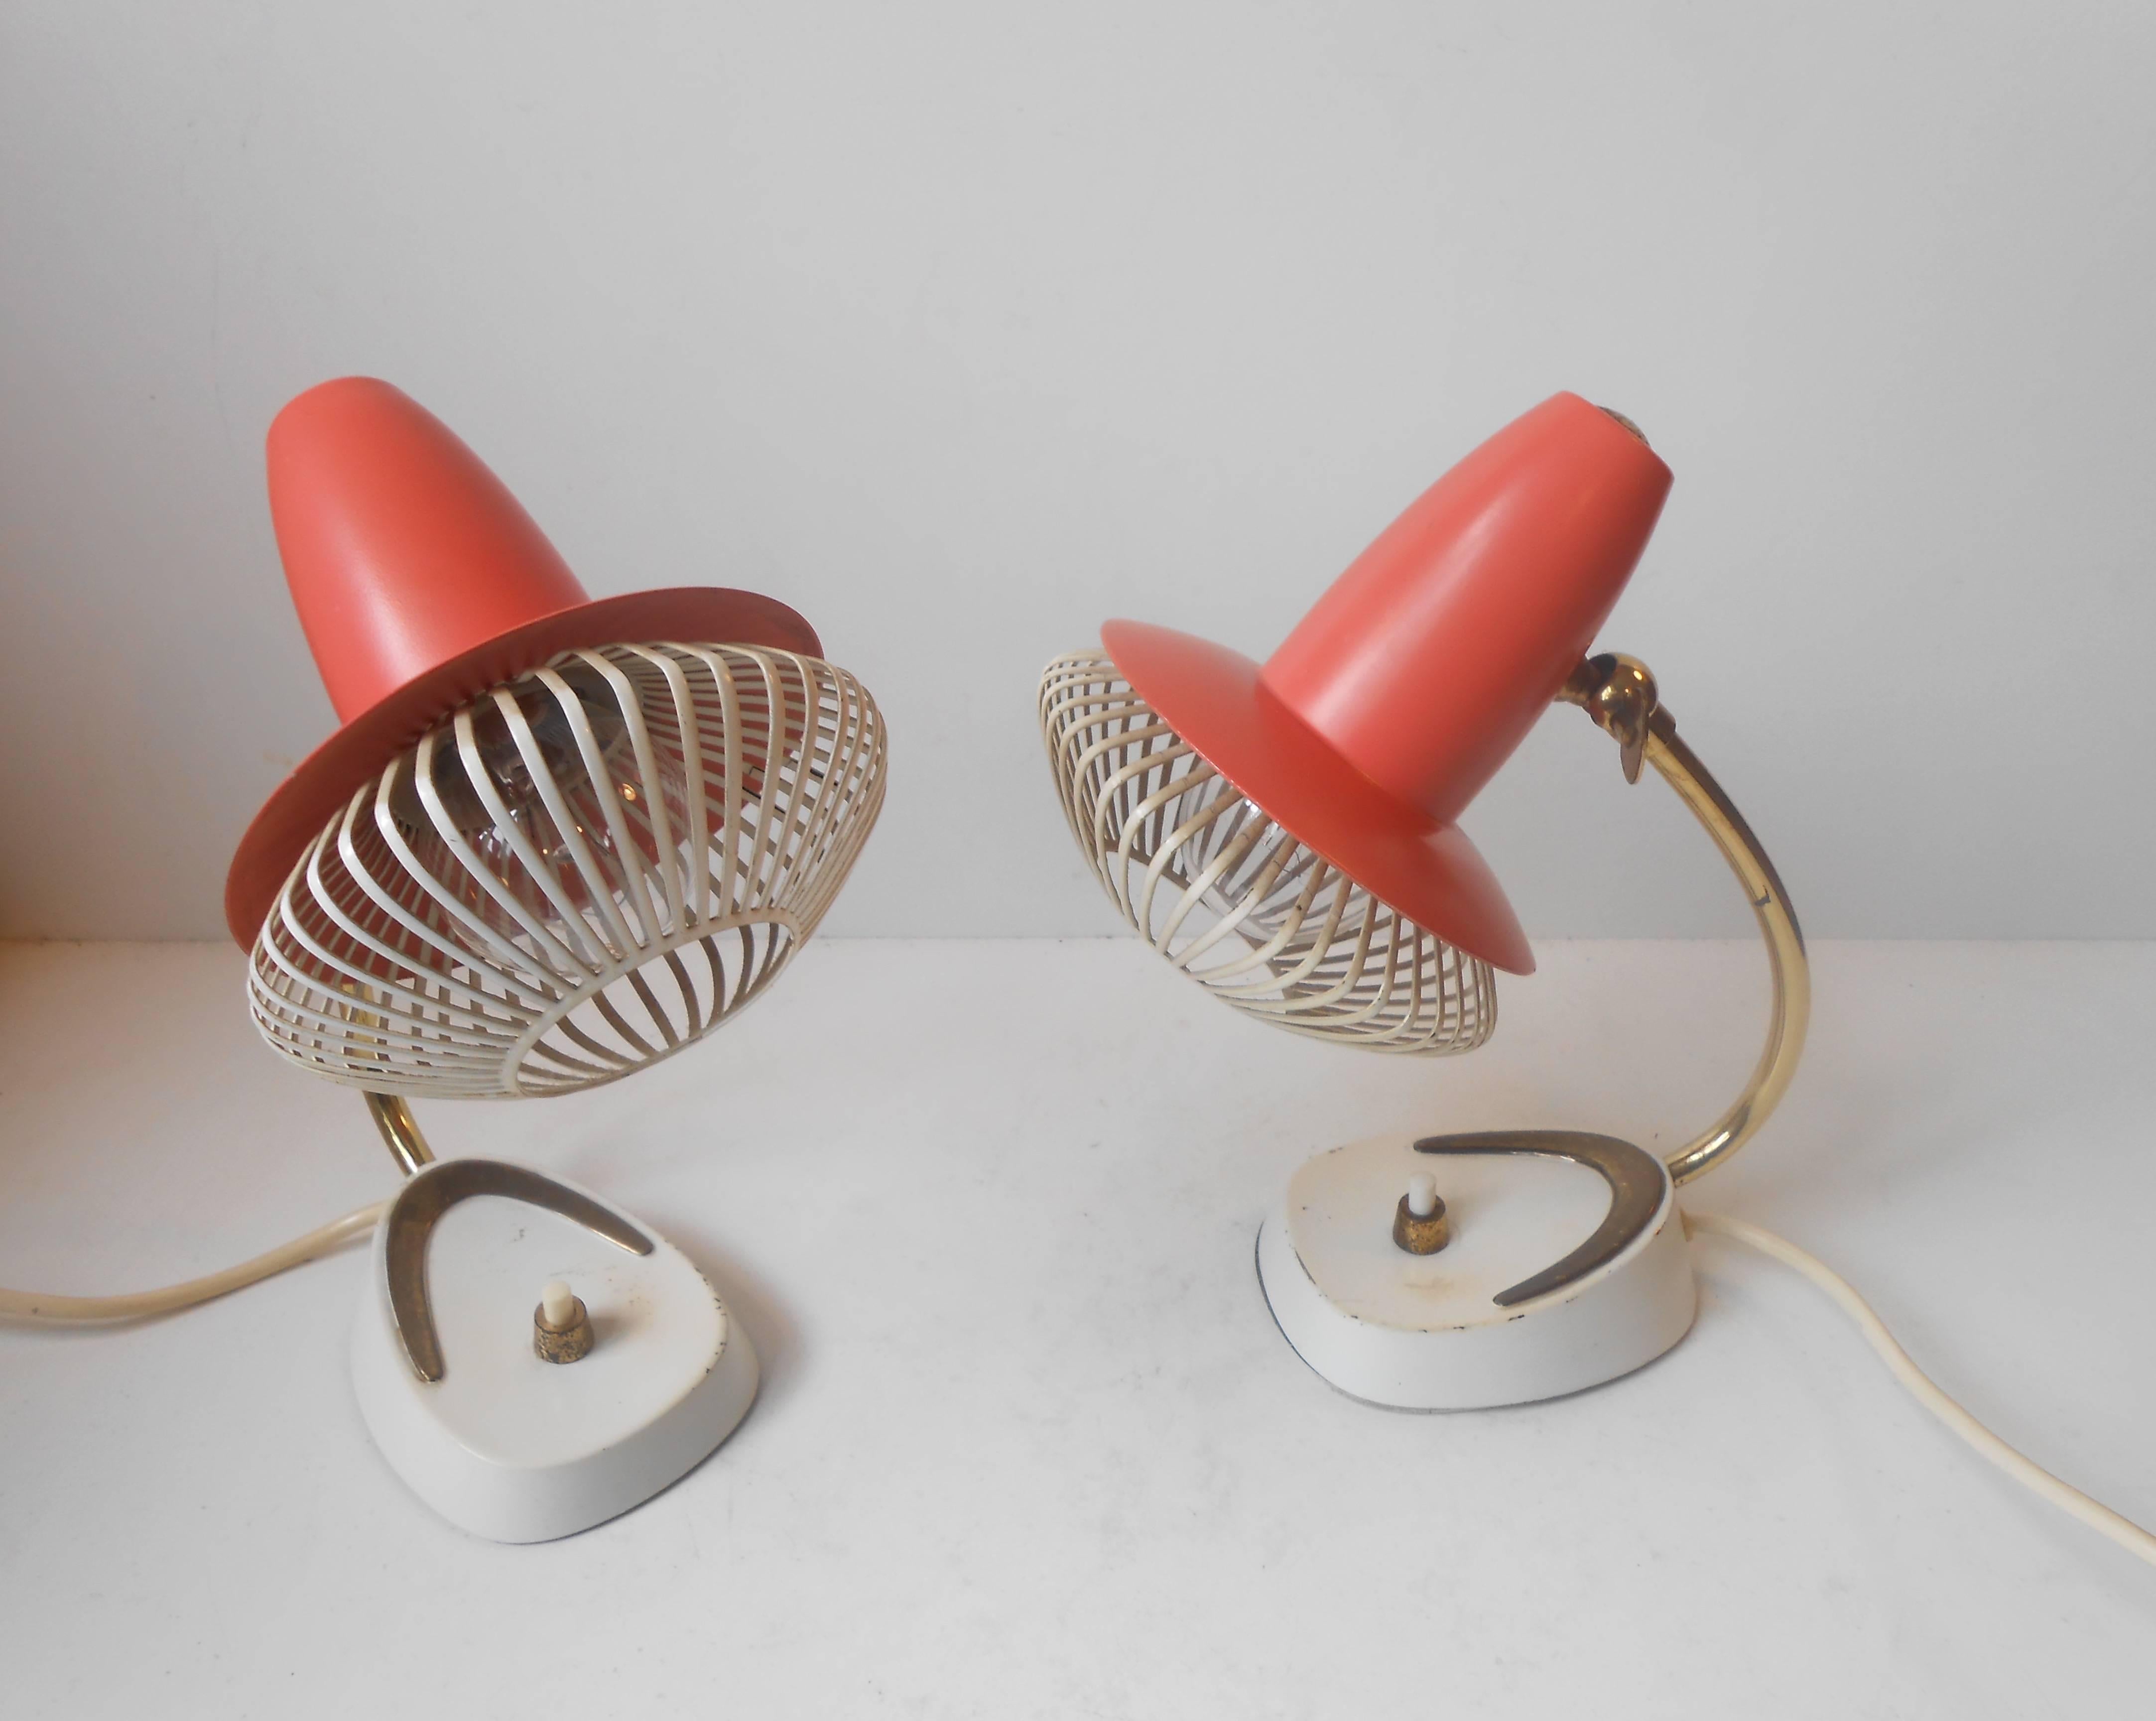 Metal Pair of Small Italian Modern Bedside Table Lamps with Wire Mesh, Stilnovo Era